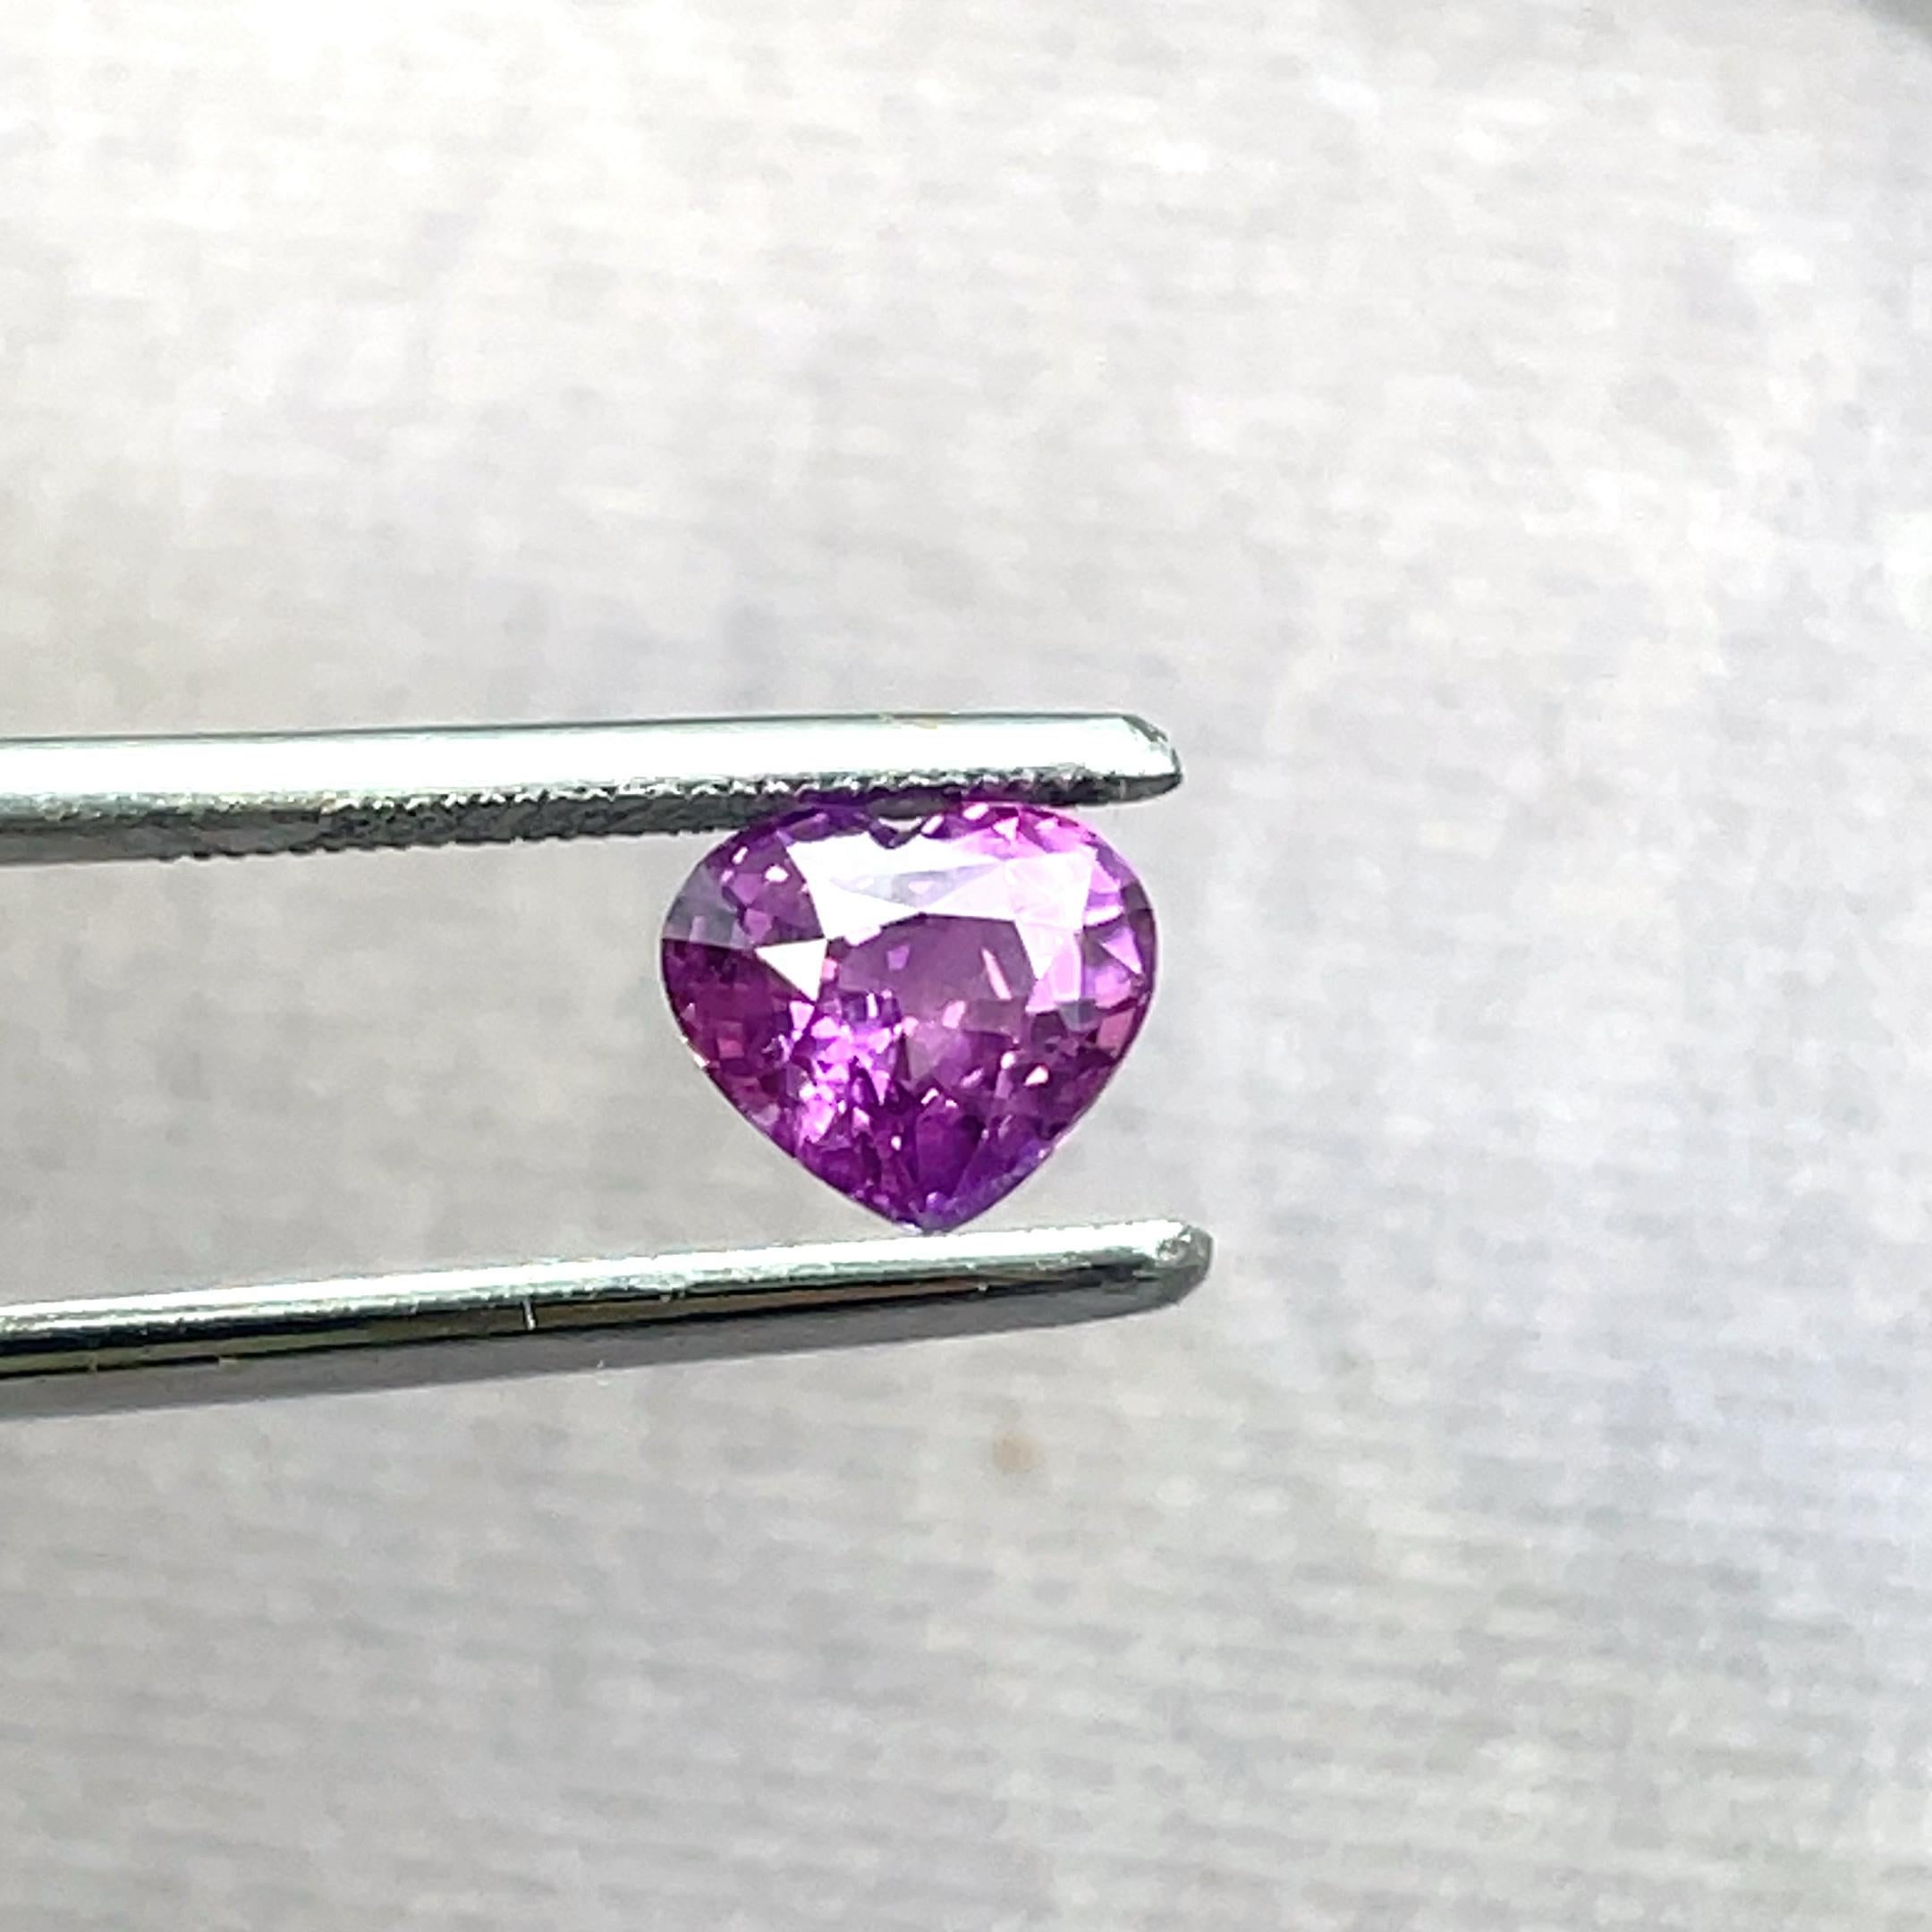 Fall head over heels for this 1.74 Cts heart-shaped pink sapphire, which has been skillfully fashioned into the shape of a heart to symbolize passion and love. 

This gemstone reflects the soft colors of romance and offers a heartfelt sign of